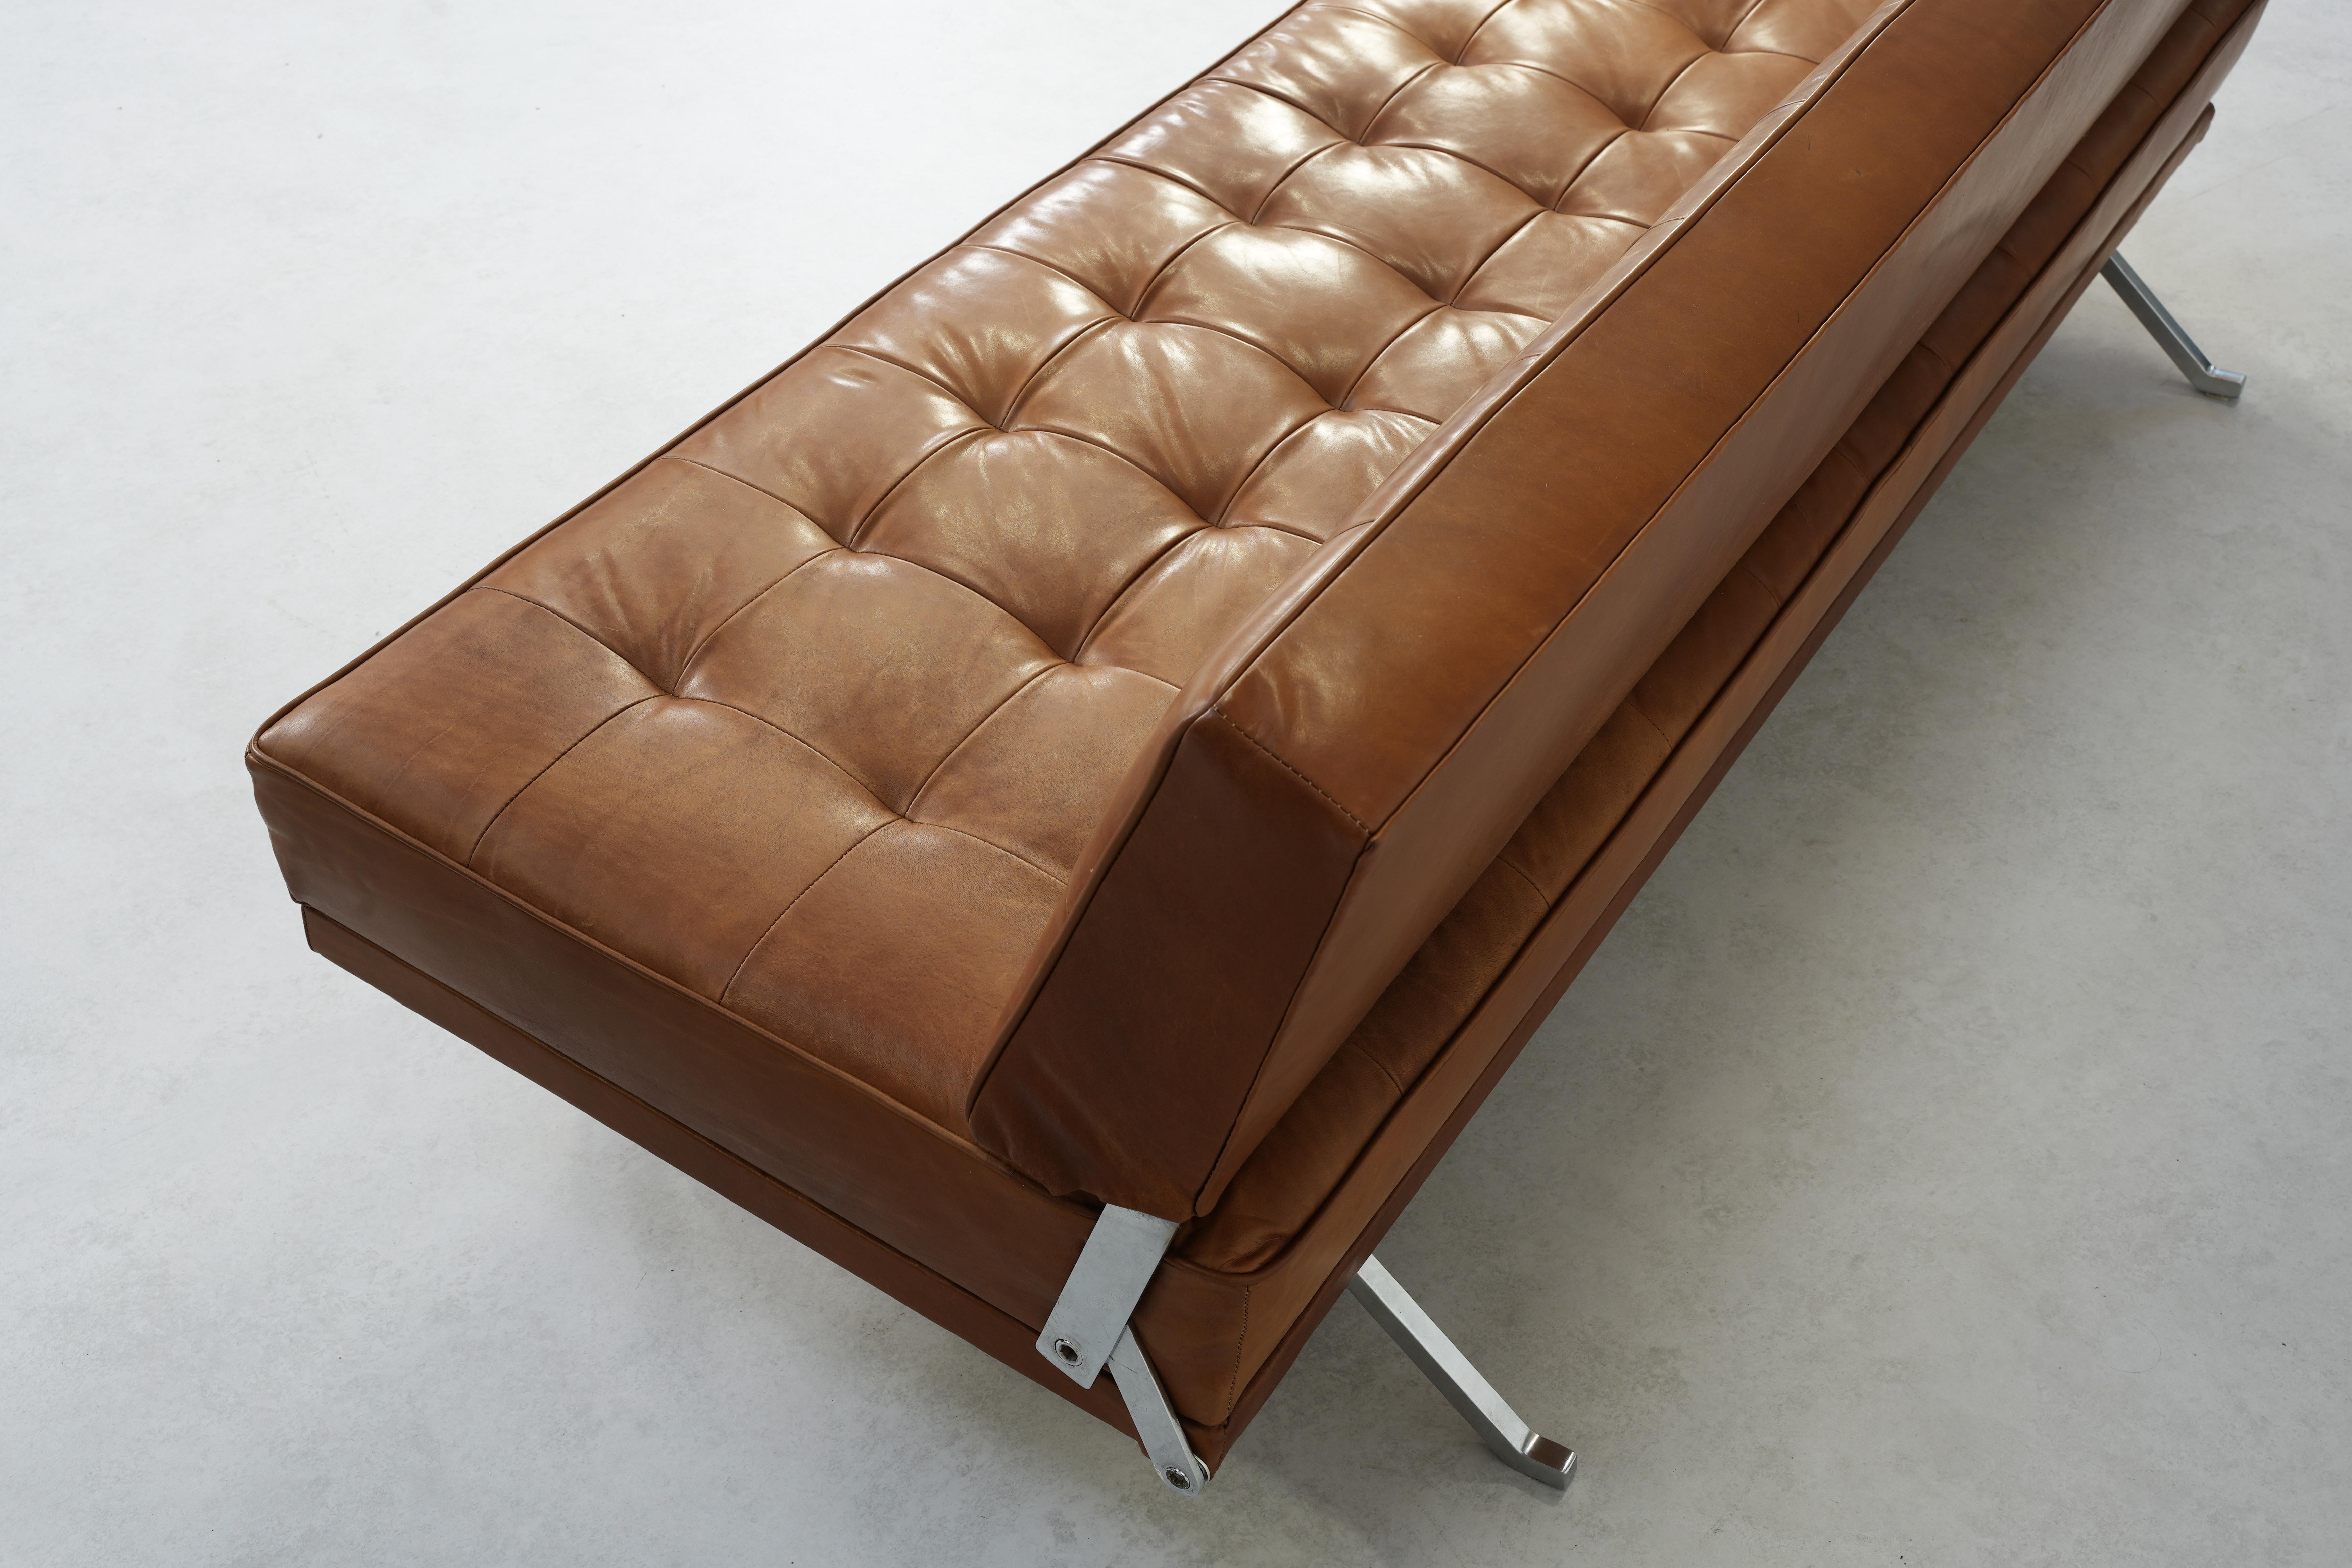 Sofa Daybed Constanze by Johannes Spalt for Wittmann, Austria 1960ies 2